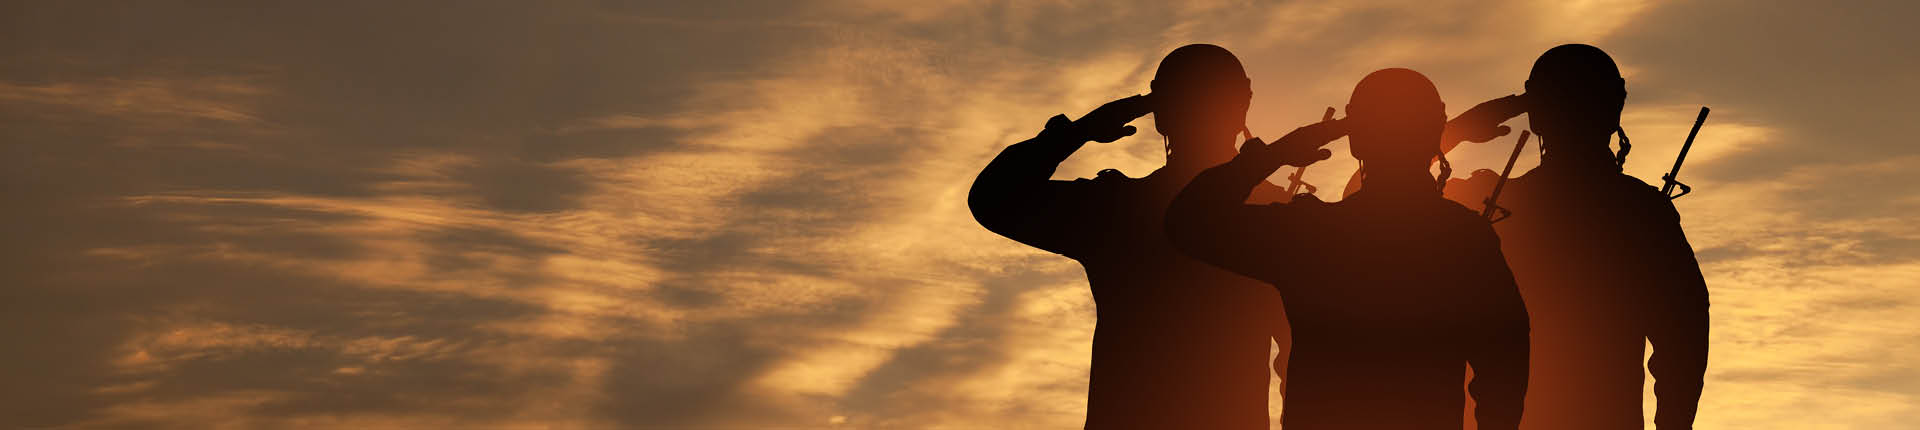 A silhouette of 3 soldiers heading